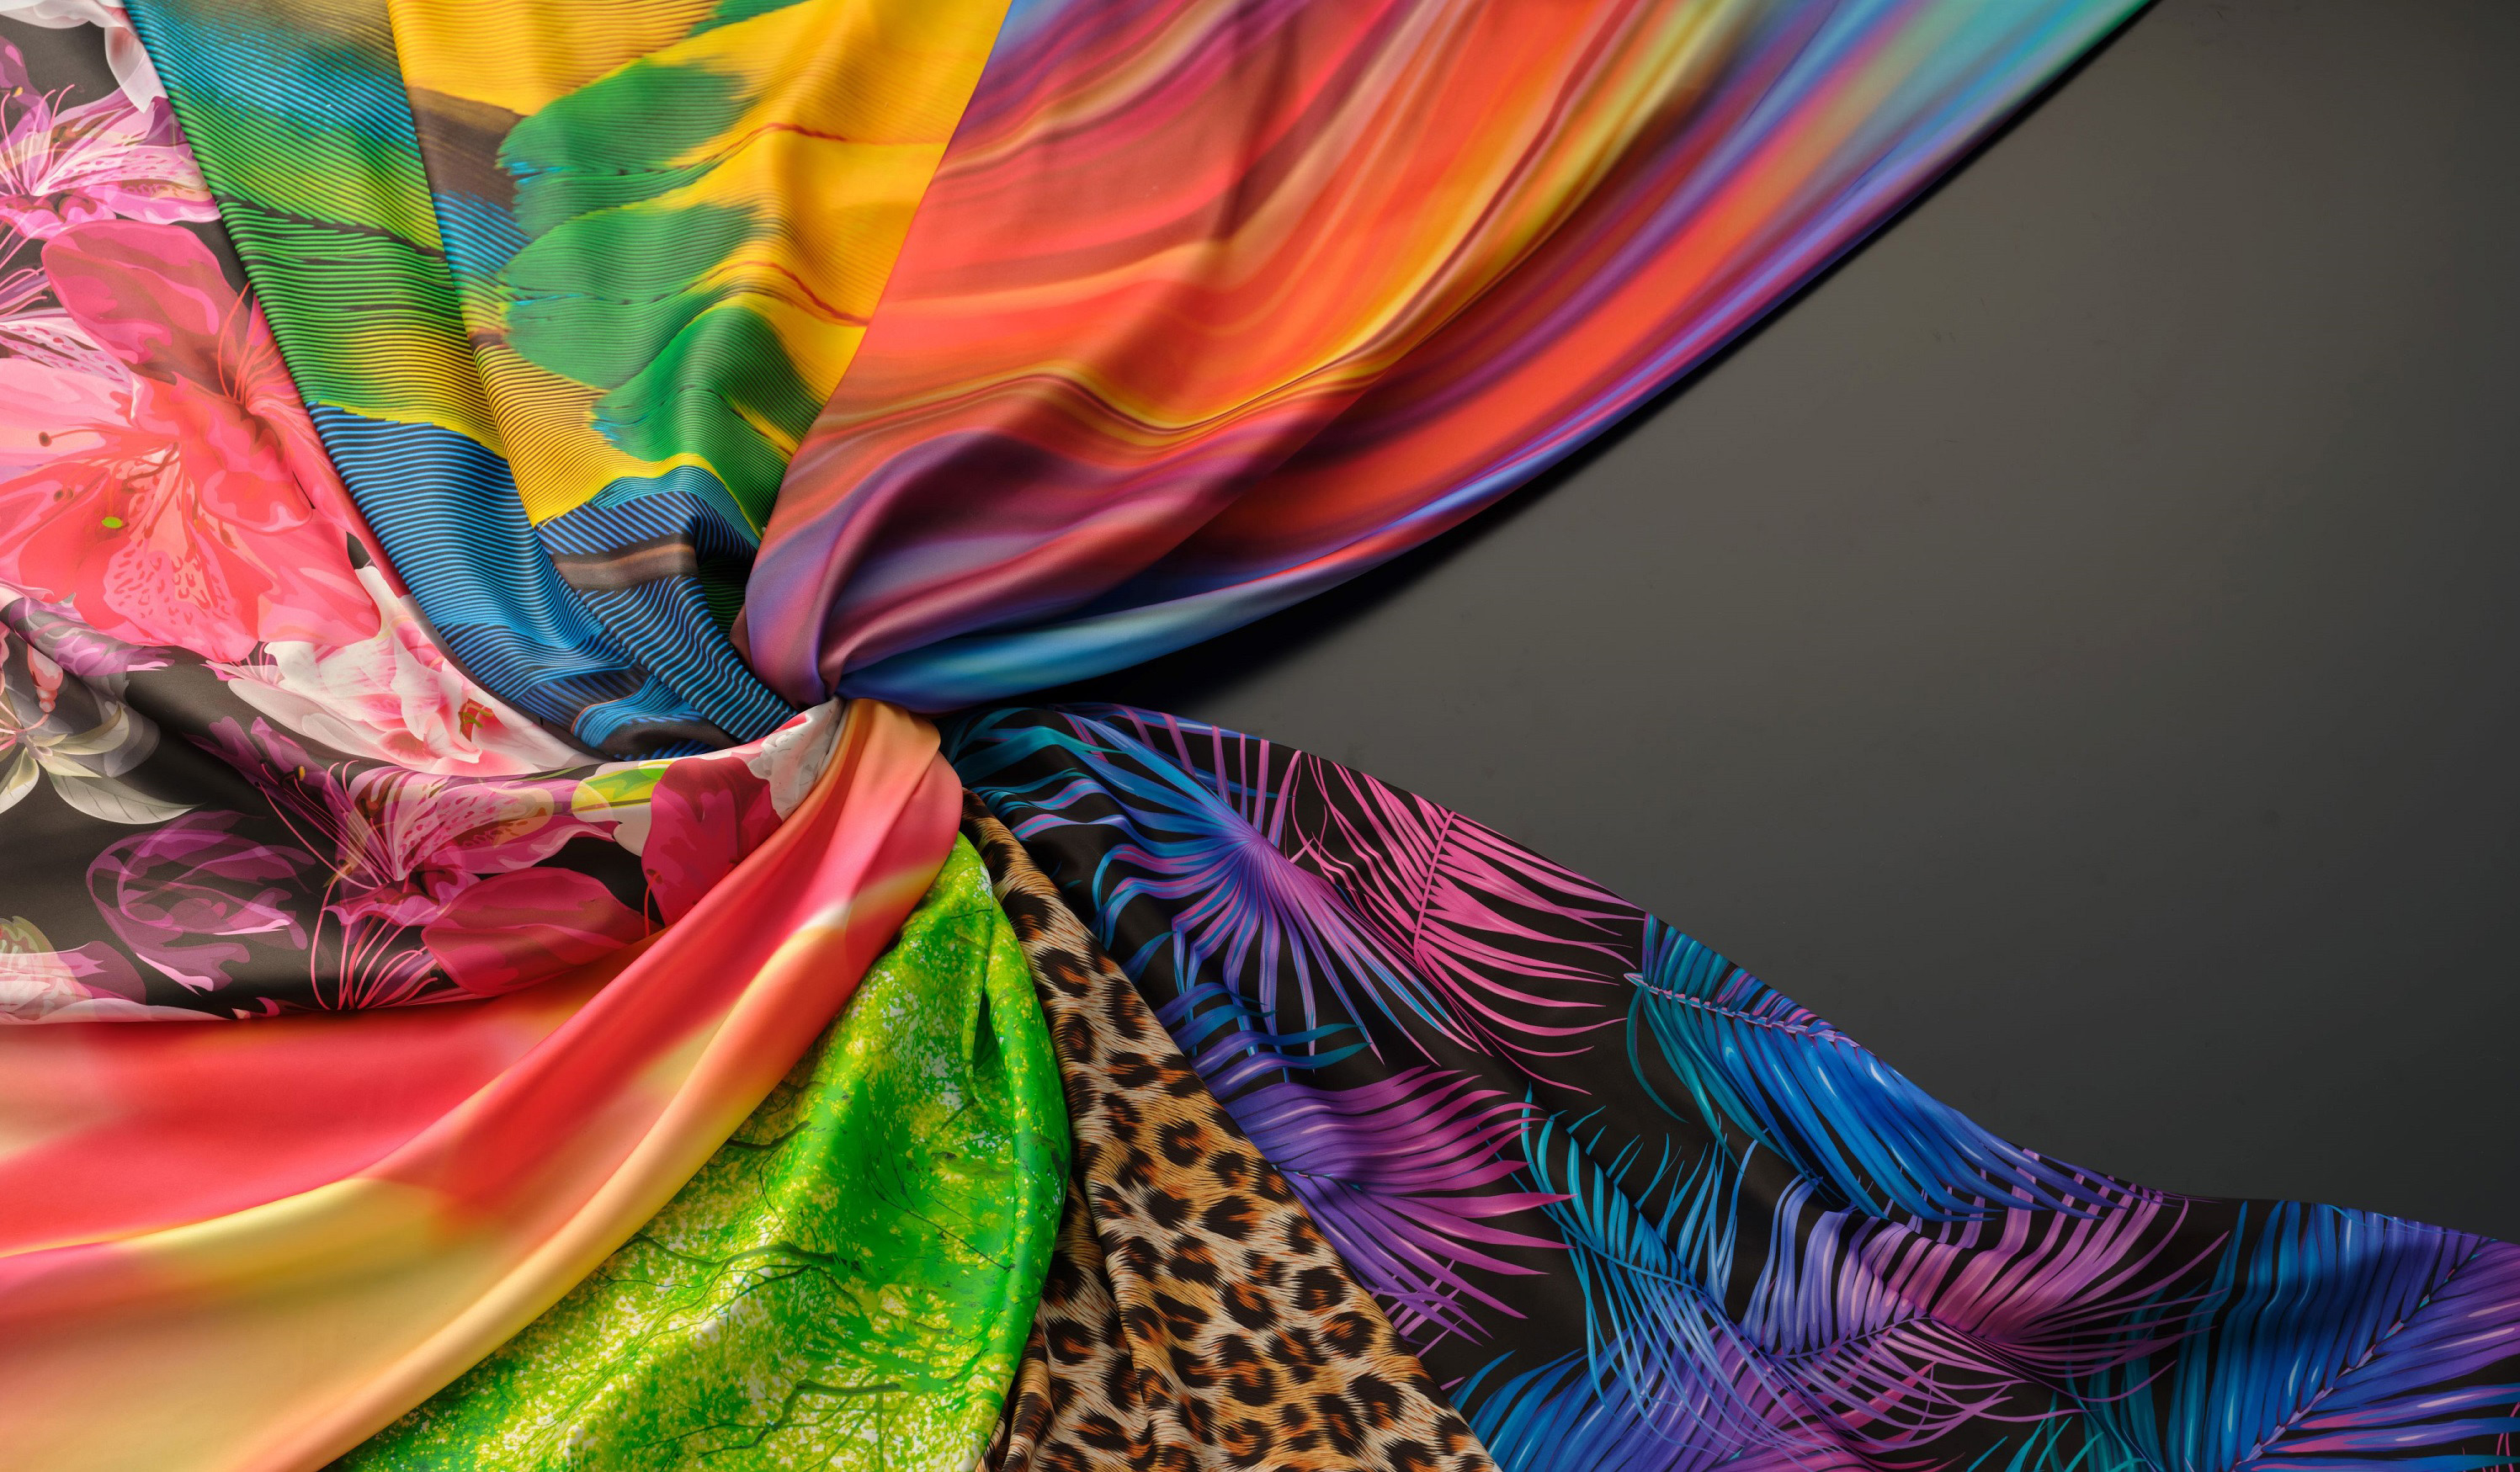 The Collaboration Of Kyocera's Inkjet Textile Printer FOREARTH And